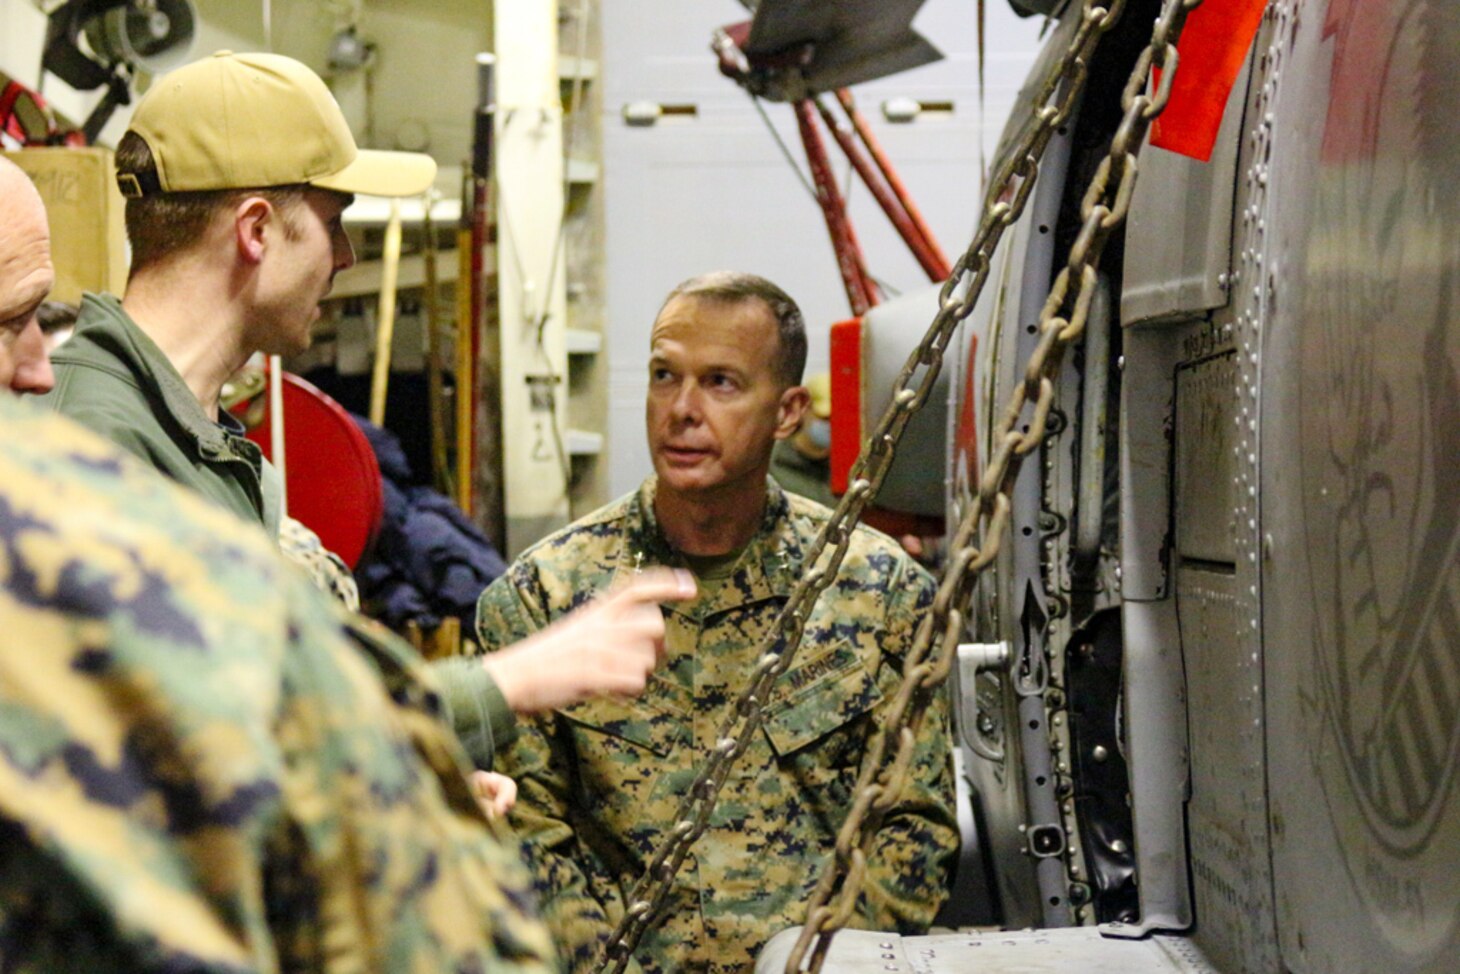 Maj. Gen. Jay Bargeron, commanding general, 3d Marine Division and Lt. Cmdr. Fleet Lawrence, Helicopter Maritime Strike Squadron (HSM) 51 are pictured with one of USS Ralph Johnson’s embarked MH-60R Helicopters. HSM-51 ‘Warlords’ Combat Element 4 contributes to the ship’s organic airborne Maritime Strike capability as it supports Resolute Dragon, an exercise designed to strengthen the defensive capabilities of the U.S.-Japan Alliance by refining procedures for bilateral command, control, and coordination in a geographically distributed environment.